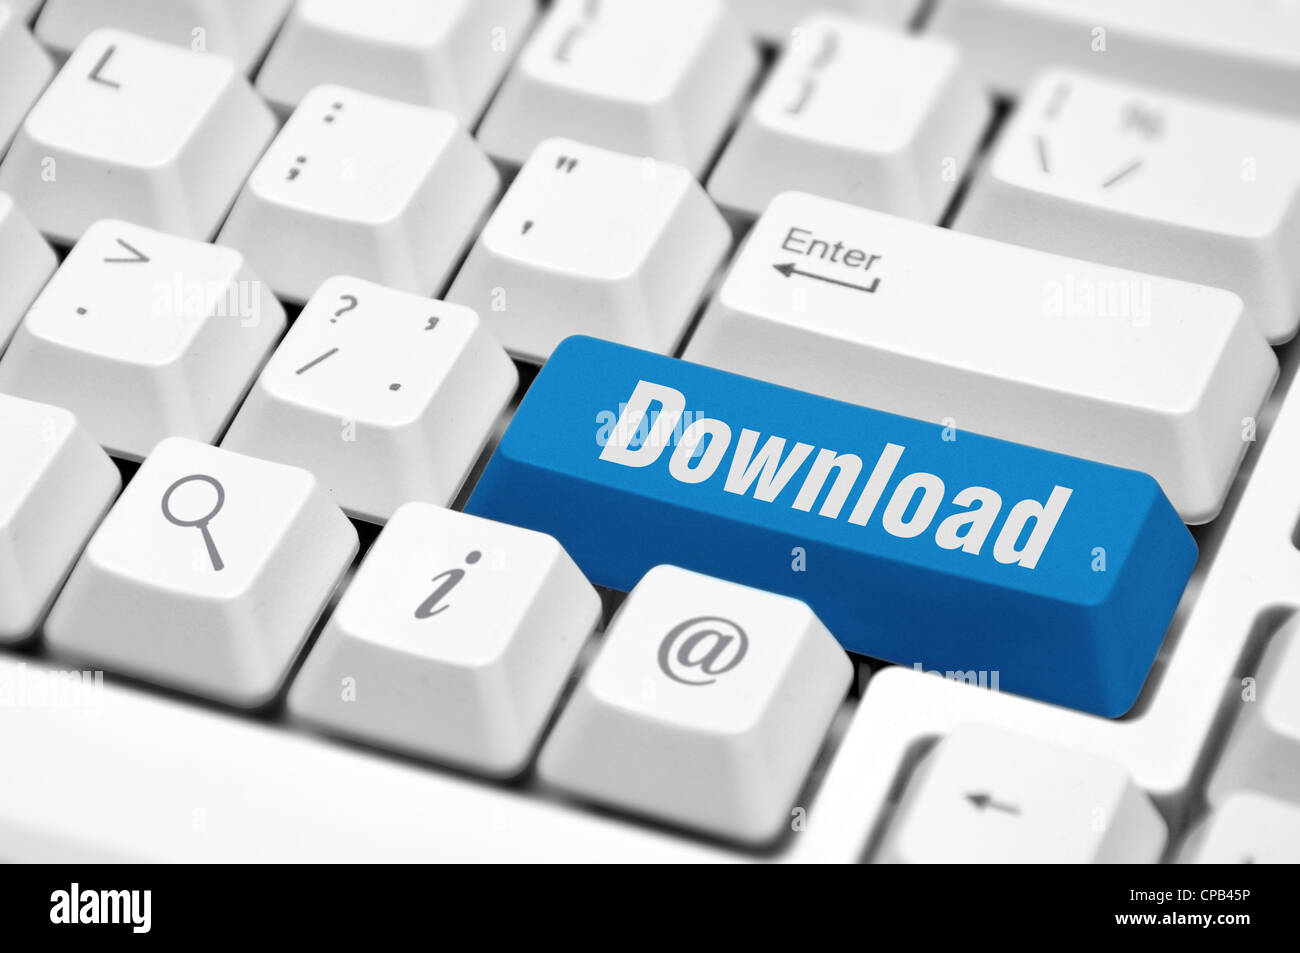 download key or button showing internet file or data sharing Stock Photo